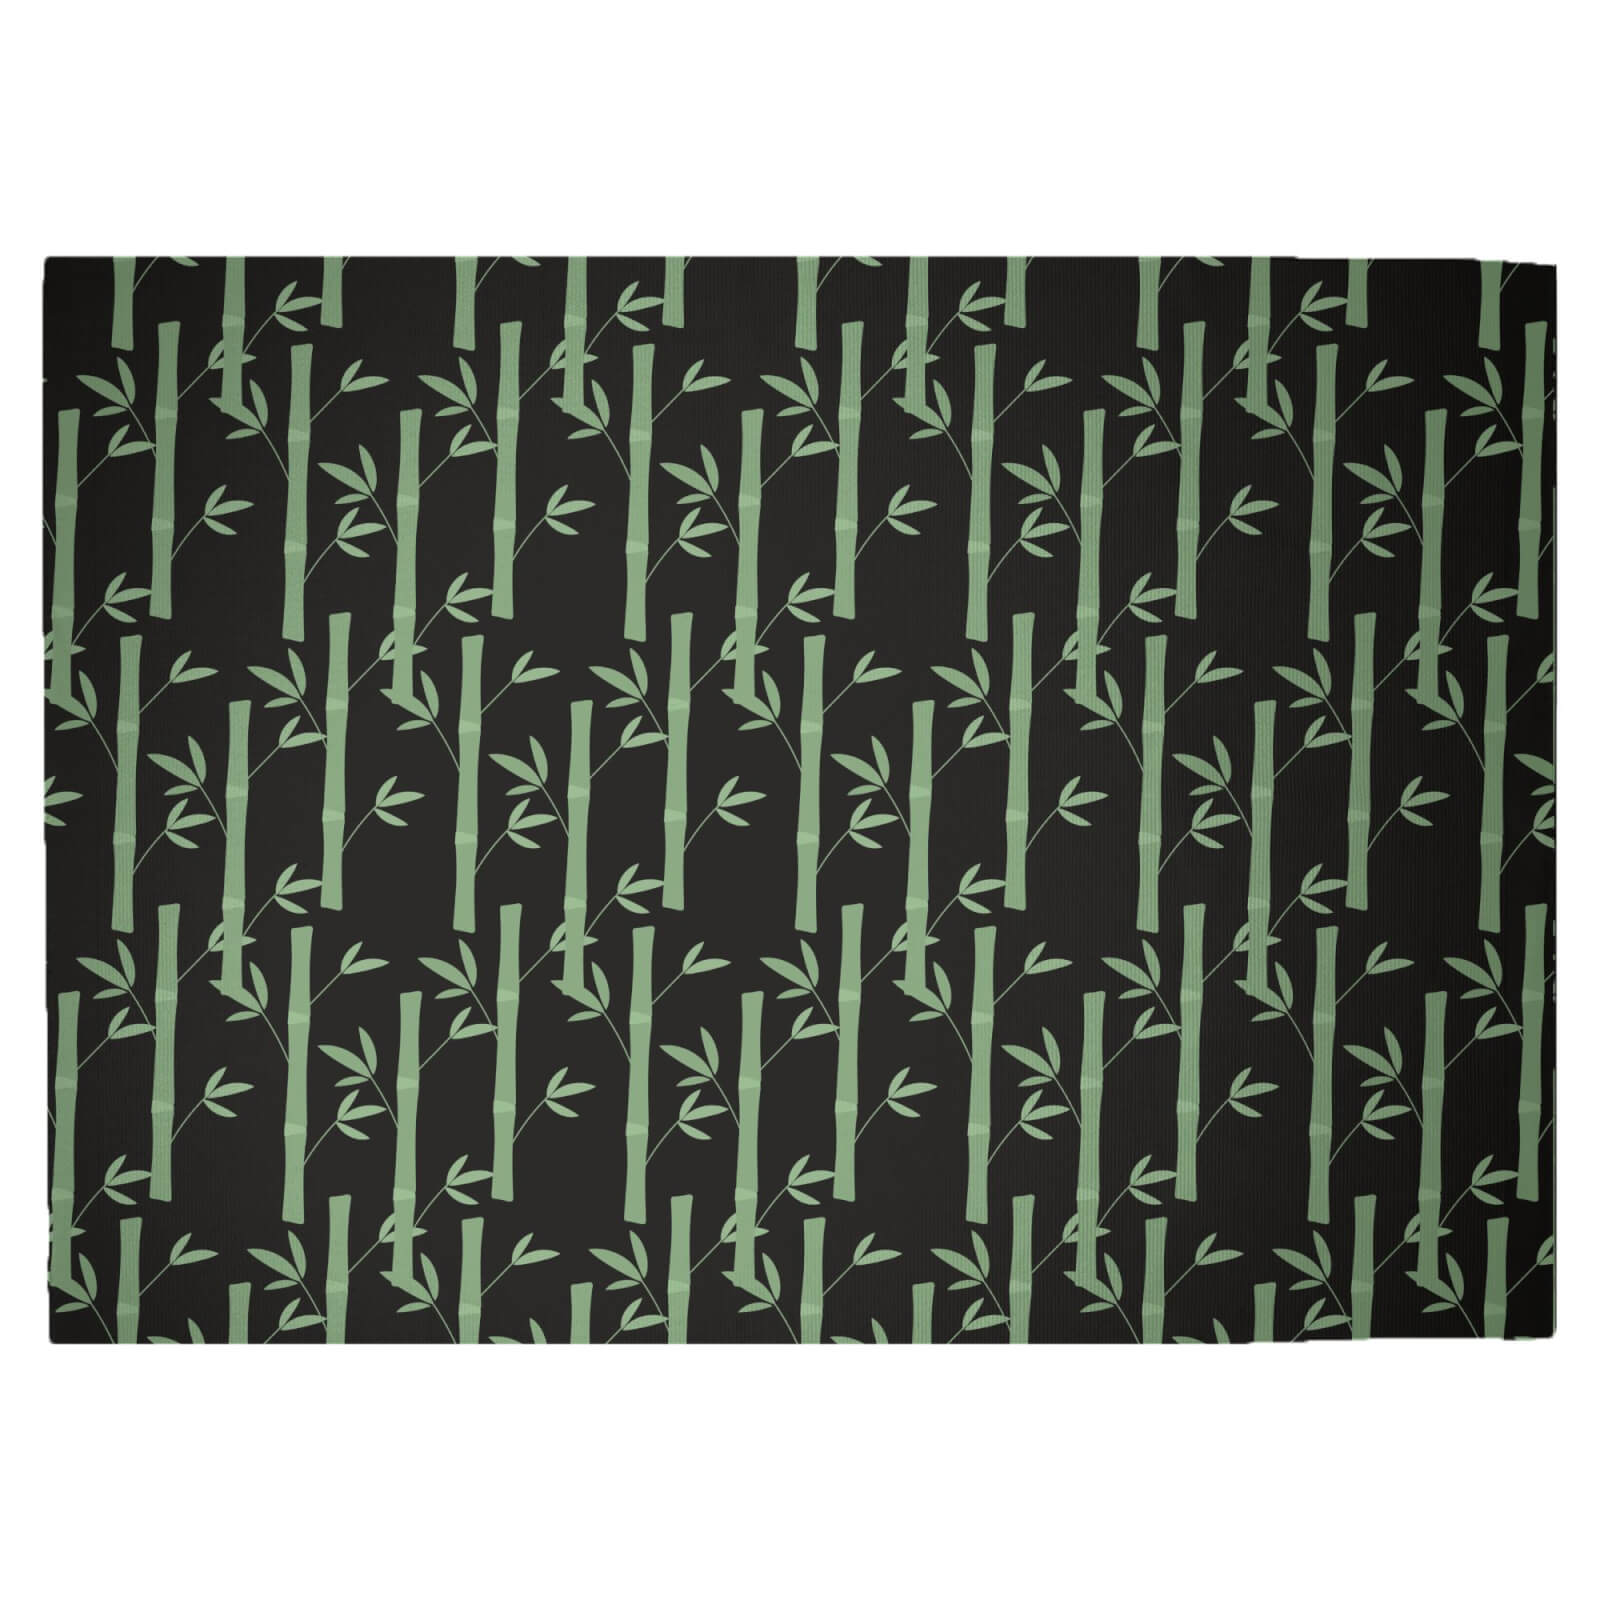 Bamboo Forest At Night Woven Rug - Large